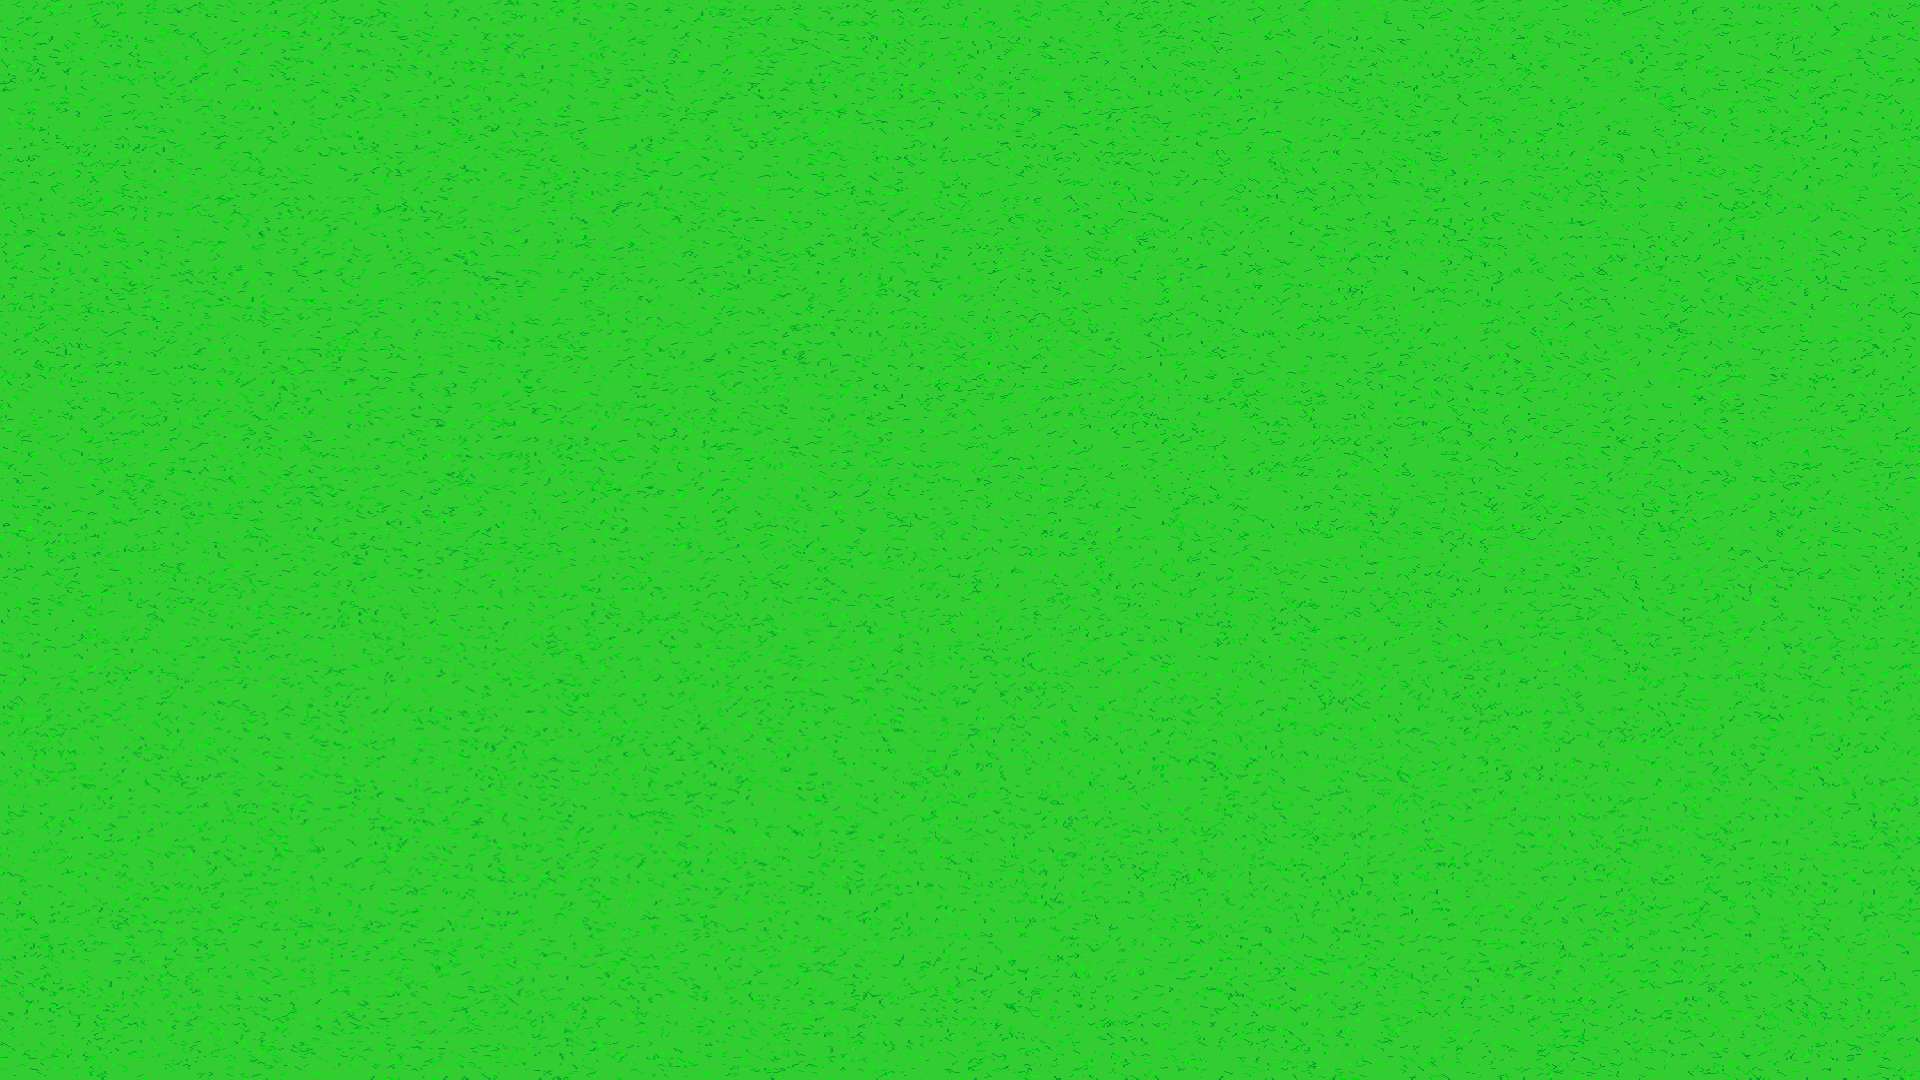 Solid Green Background Image free